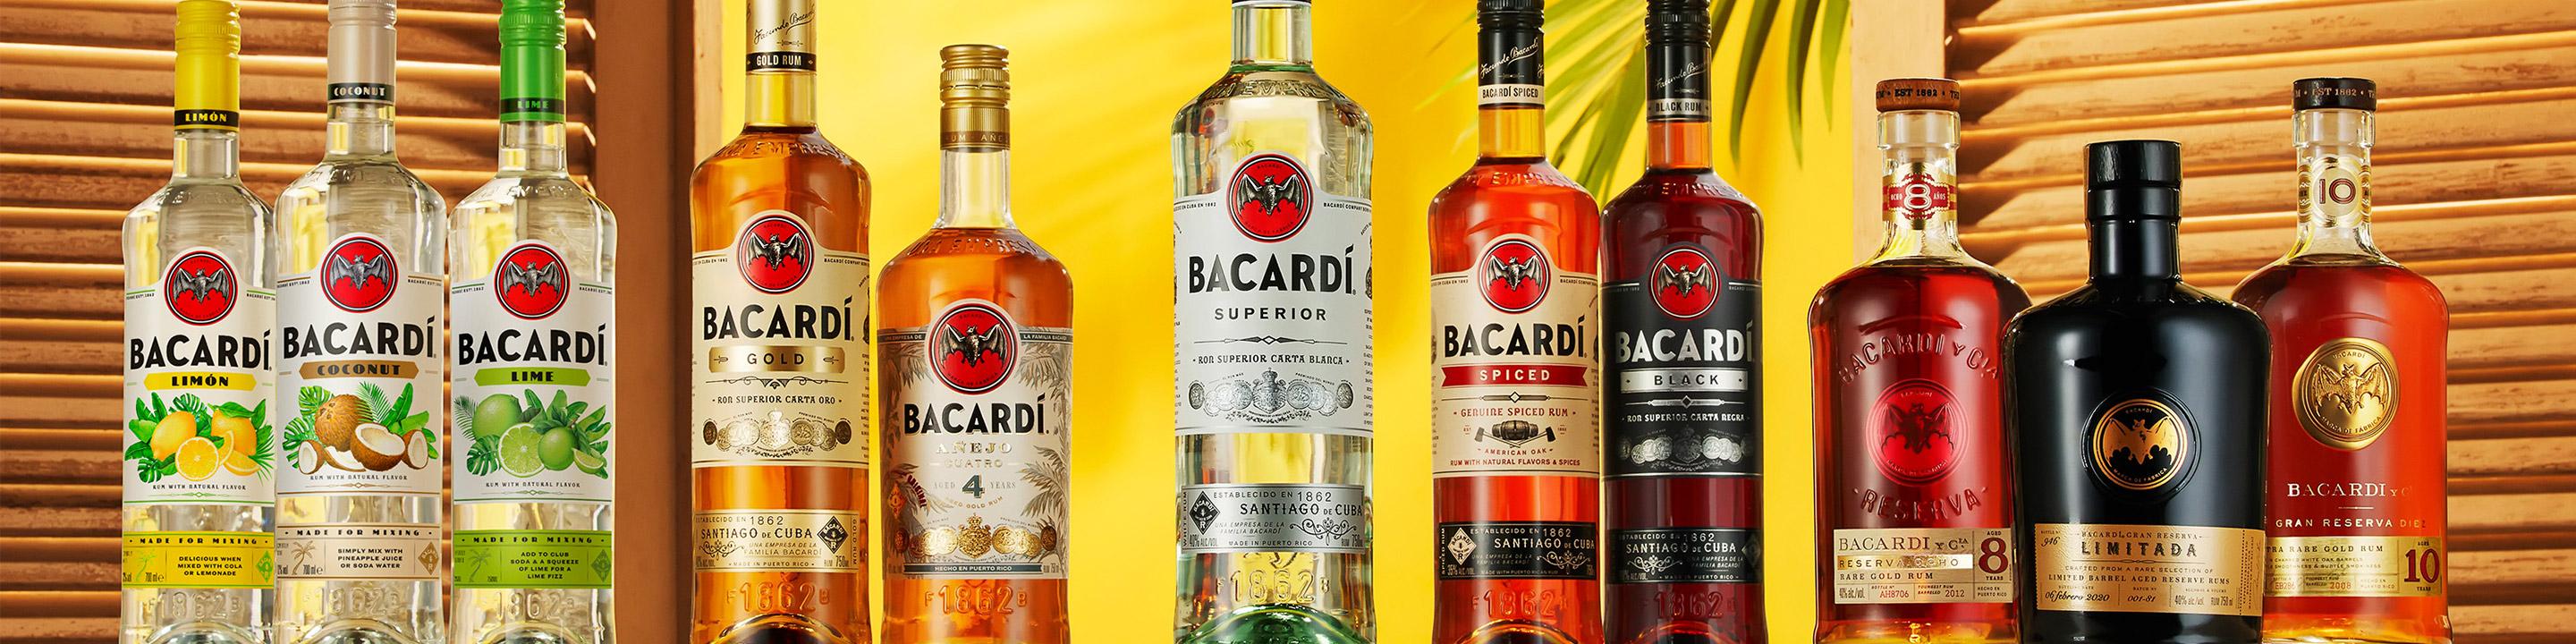 Founded by Don Facundo Bacardí in 1862, Bacardí is the world’s most awarded rum. From a selection of lighter rums that continue to inspire classic refreshing cocktails like the Mojito and the Daiquiri, to dark and complex true aged rums and rare private reserves, we have a rum for your favorite cocktail or neat sipping experience. Whatever the drinking occasion, Bacardí invites the world to #DOWHATMOVESYOU.